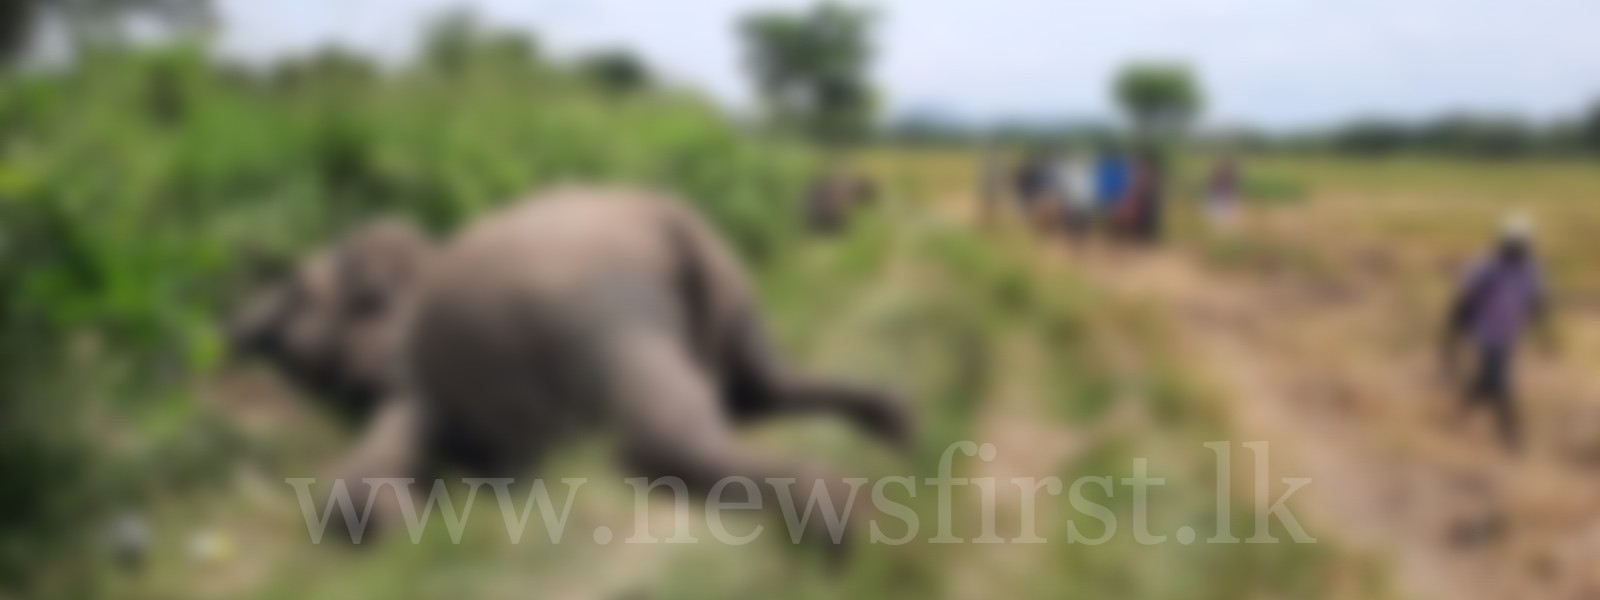 Three elephant carcasses discovered in Paddy Field